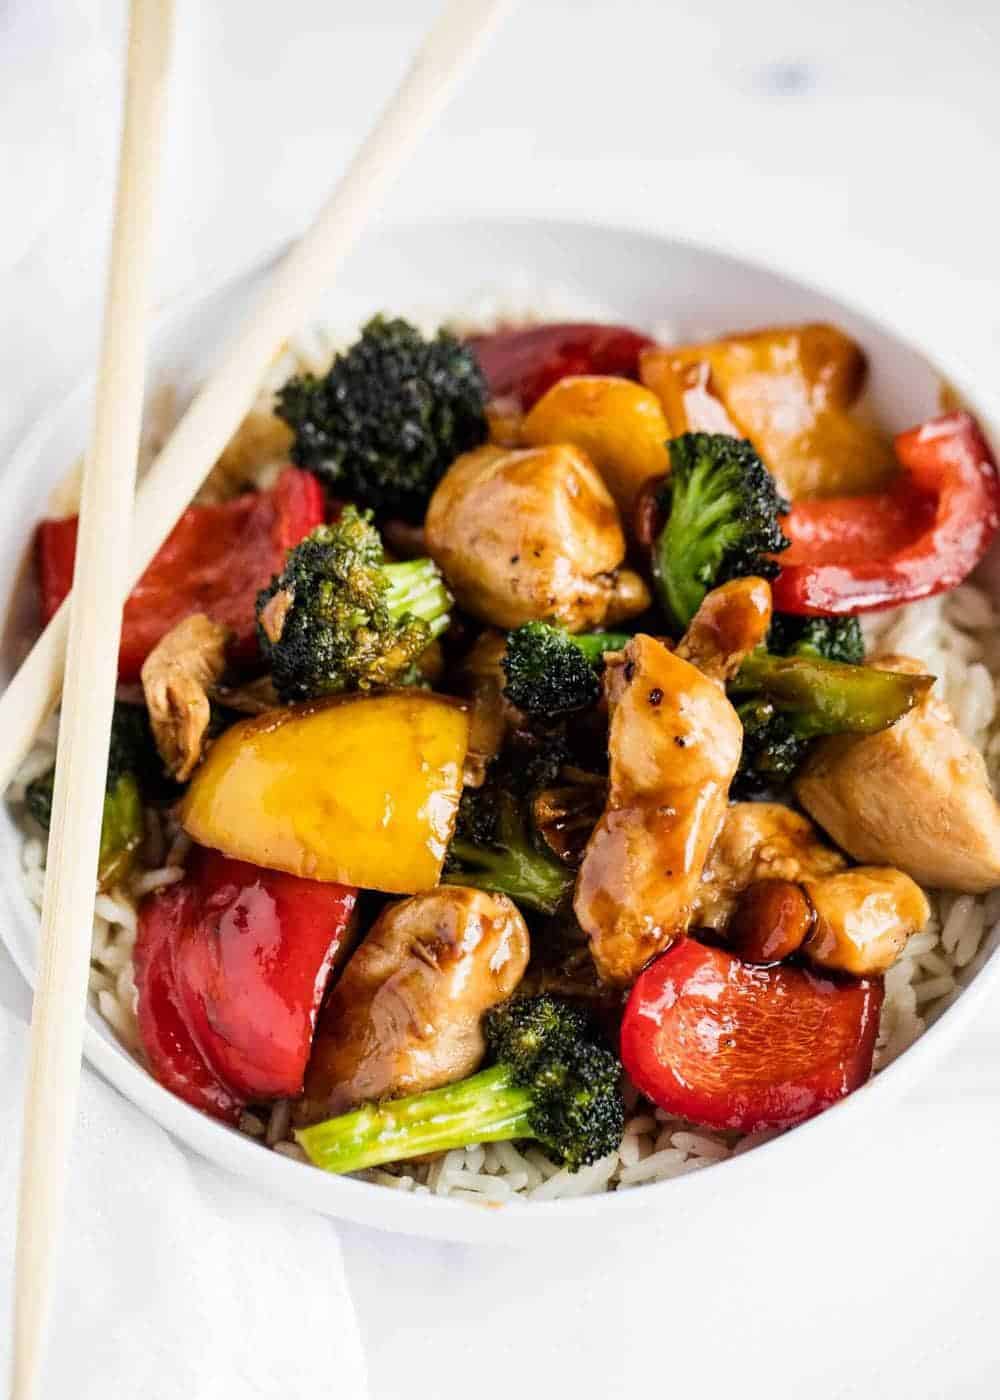 Chicken and vegetable stir fry in bowl with chopsticks.